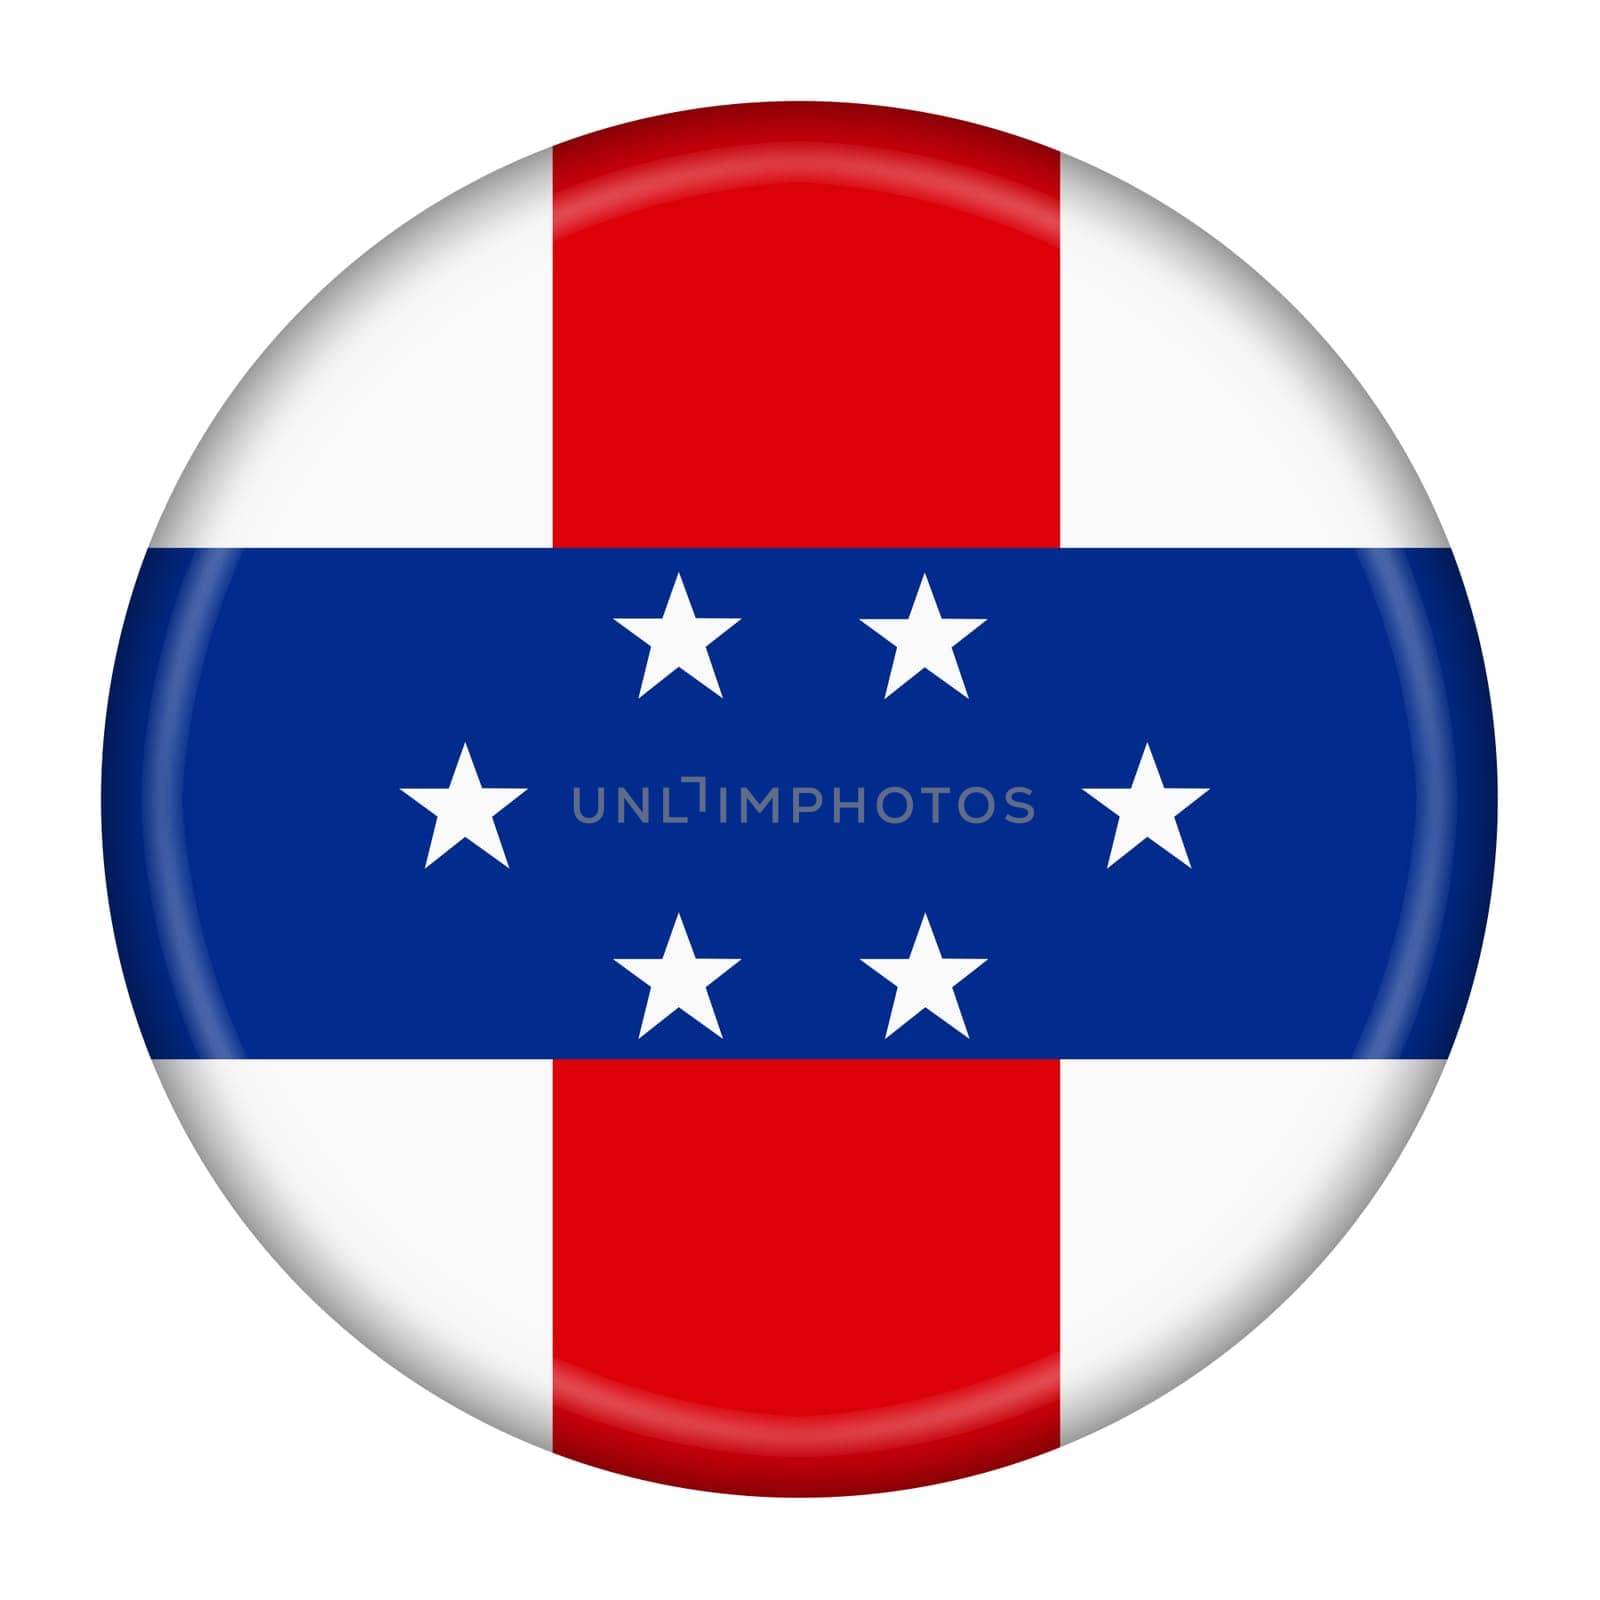 A Netherlands Antilles flag button 3d illustration with clipping path